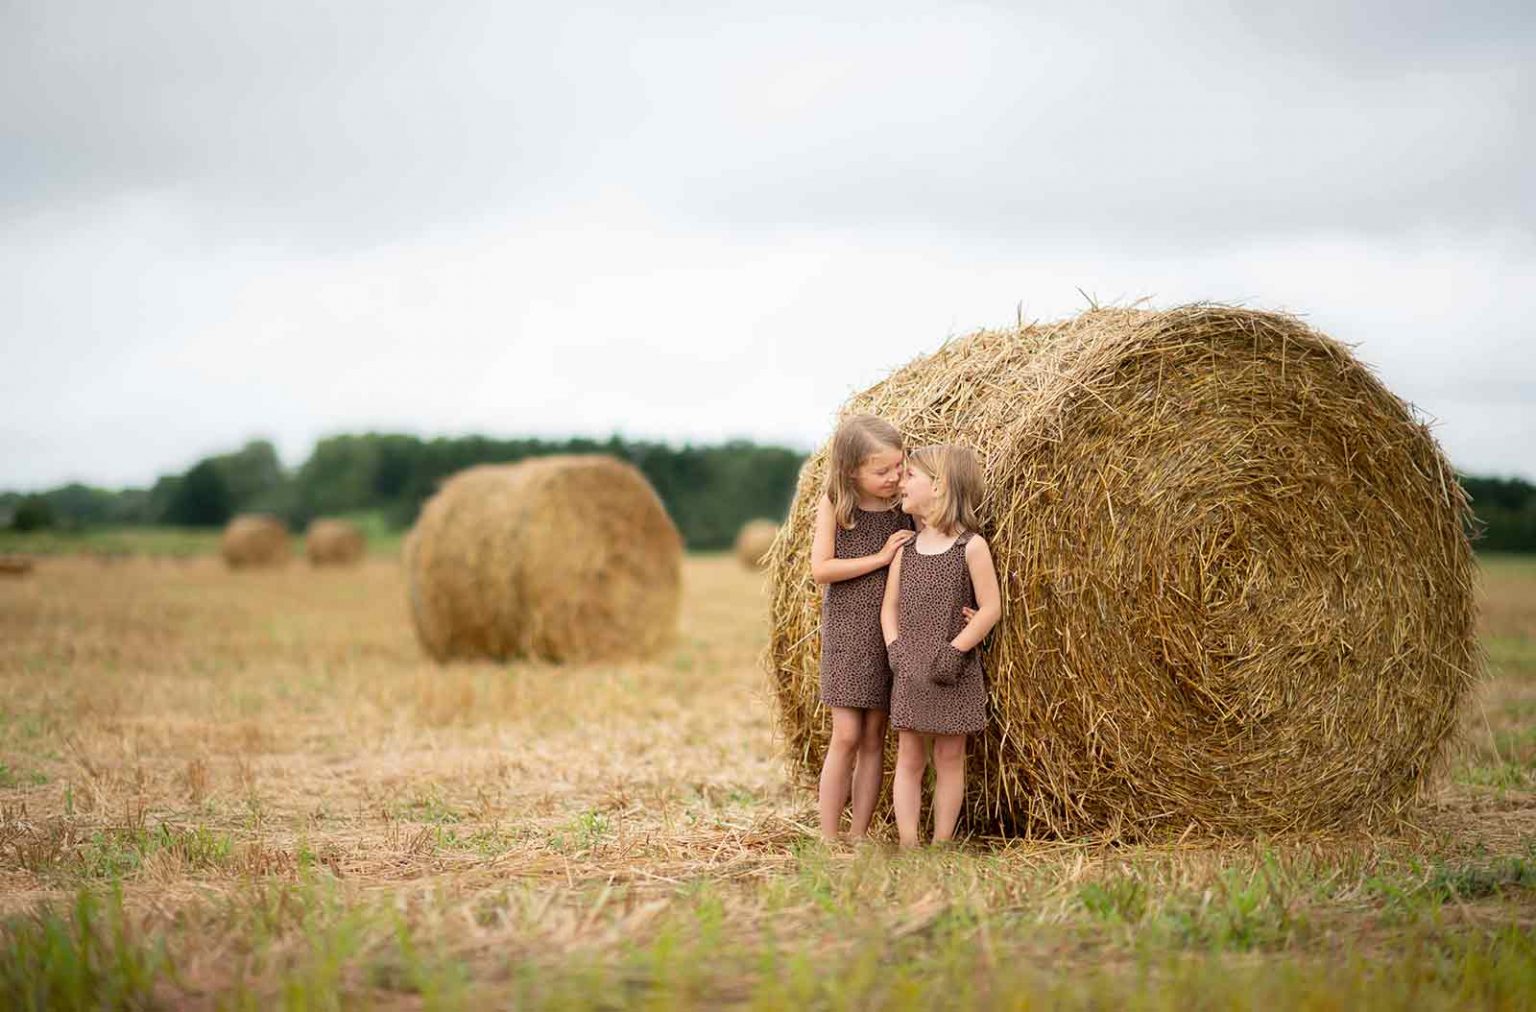 Sisters bonding on a farm in the Hamptons with rolled hay in the background